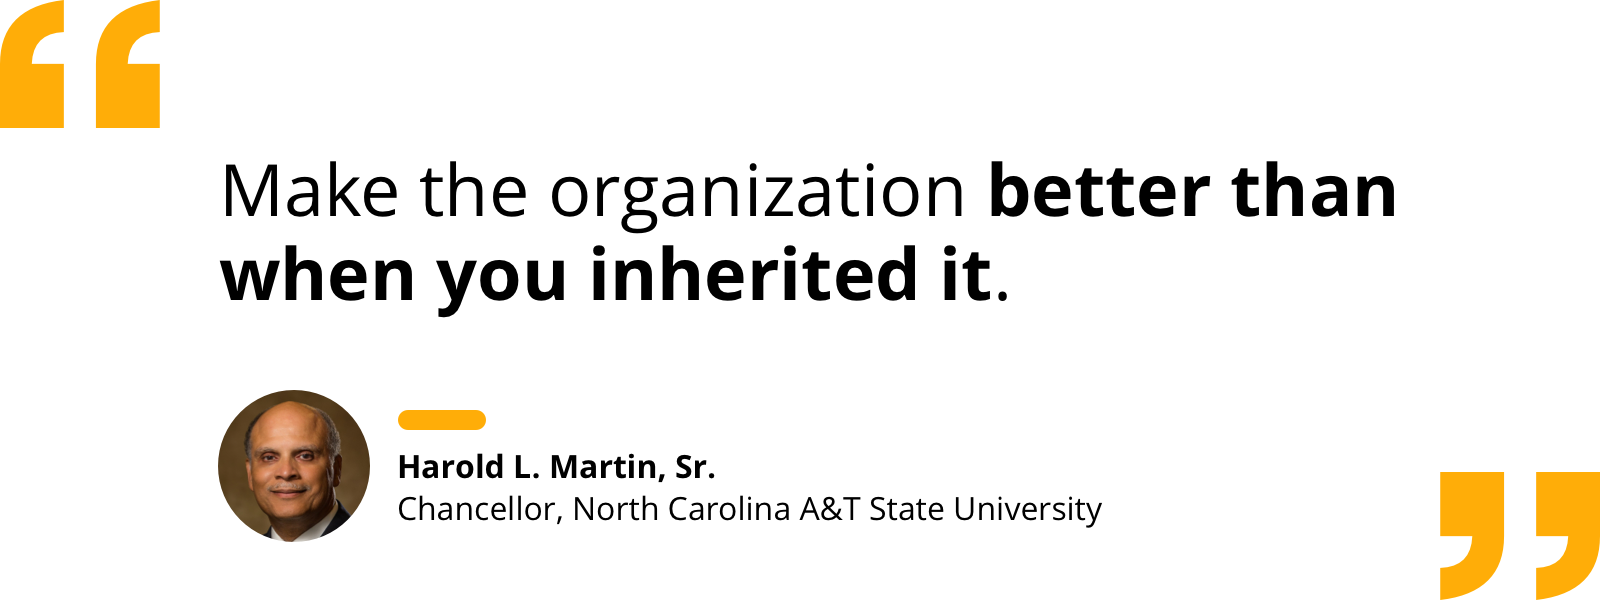 Quote by Harold L. Martin, Sr.: "Make the organization better than when you inherited it."